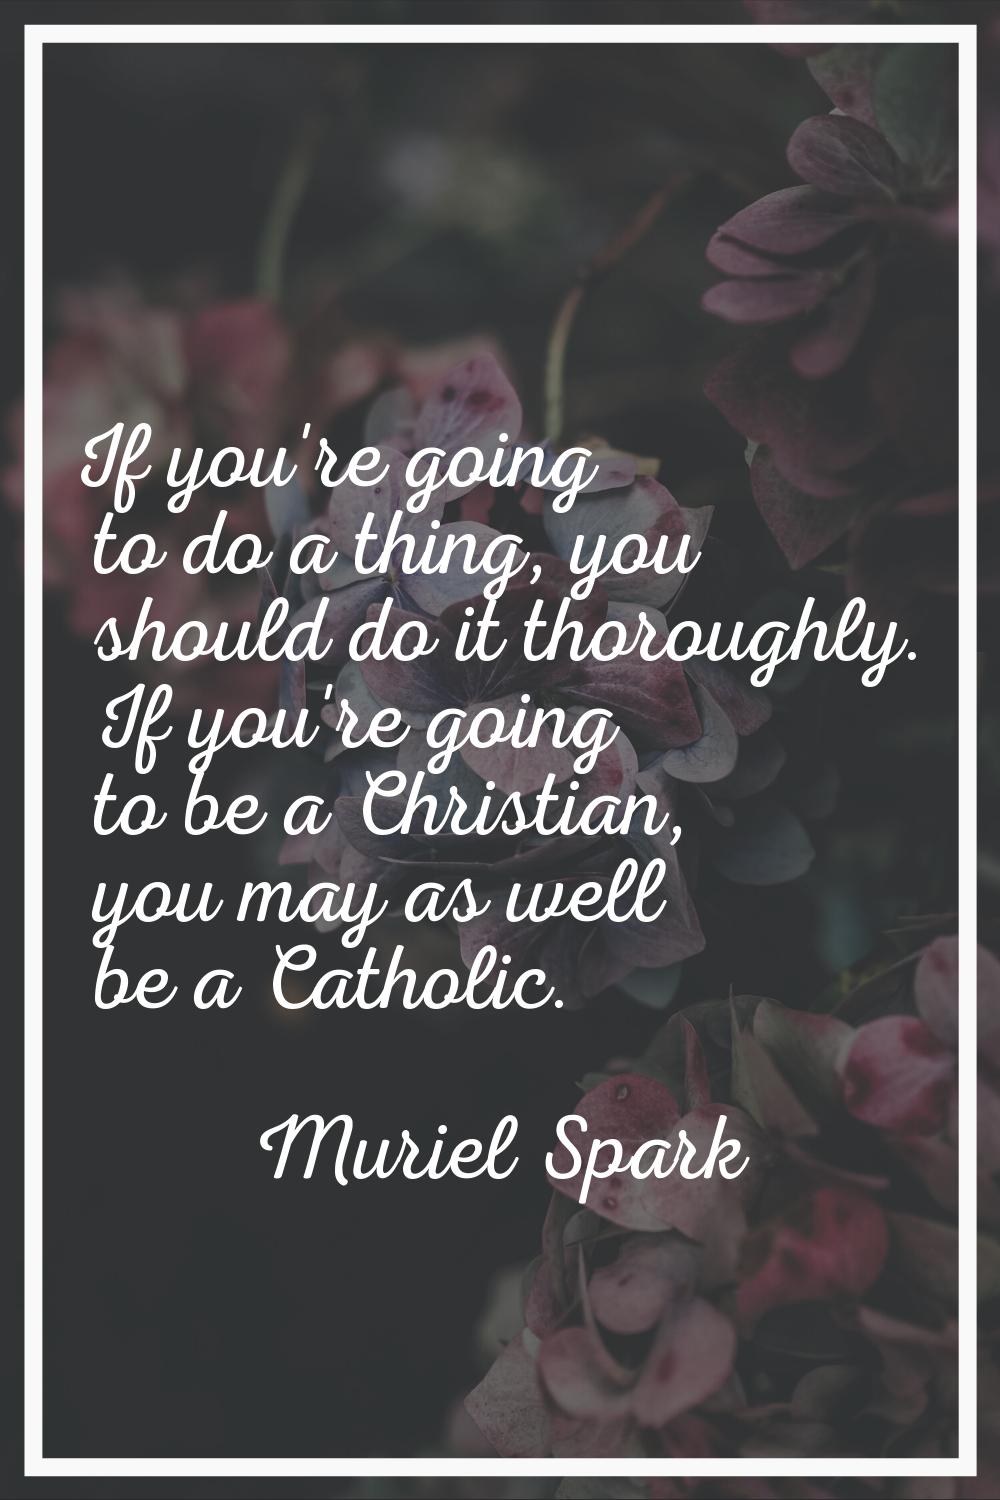 If you're going to do a thing, you should do it thoroughly. If you're going to be a Christian, you 